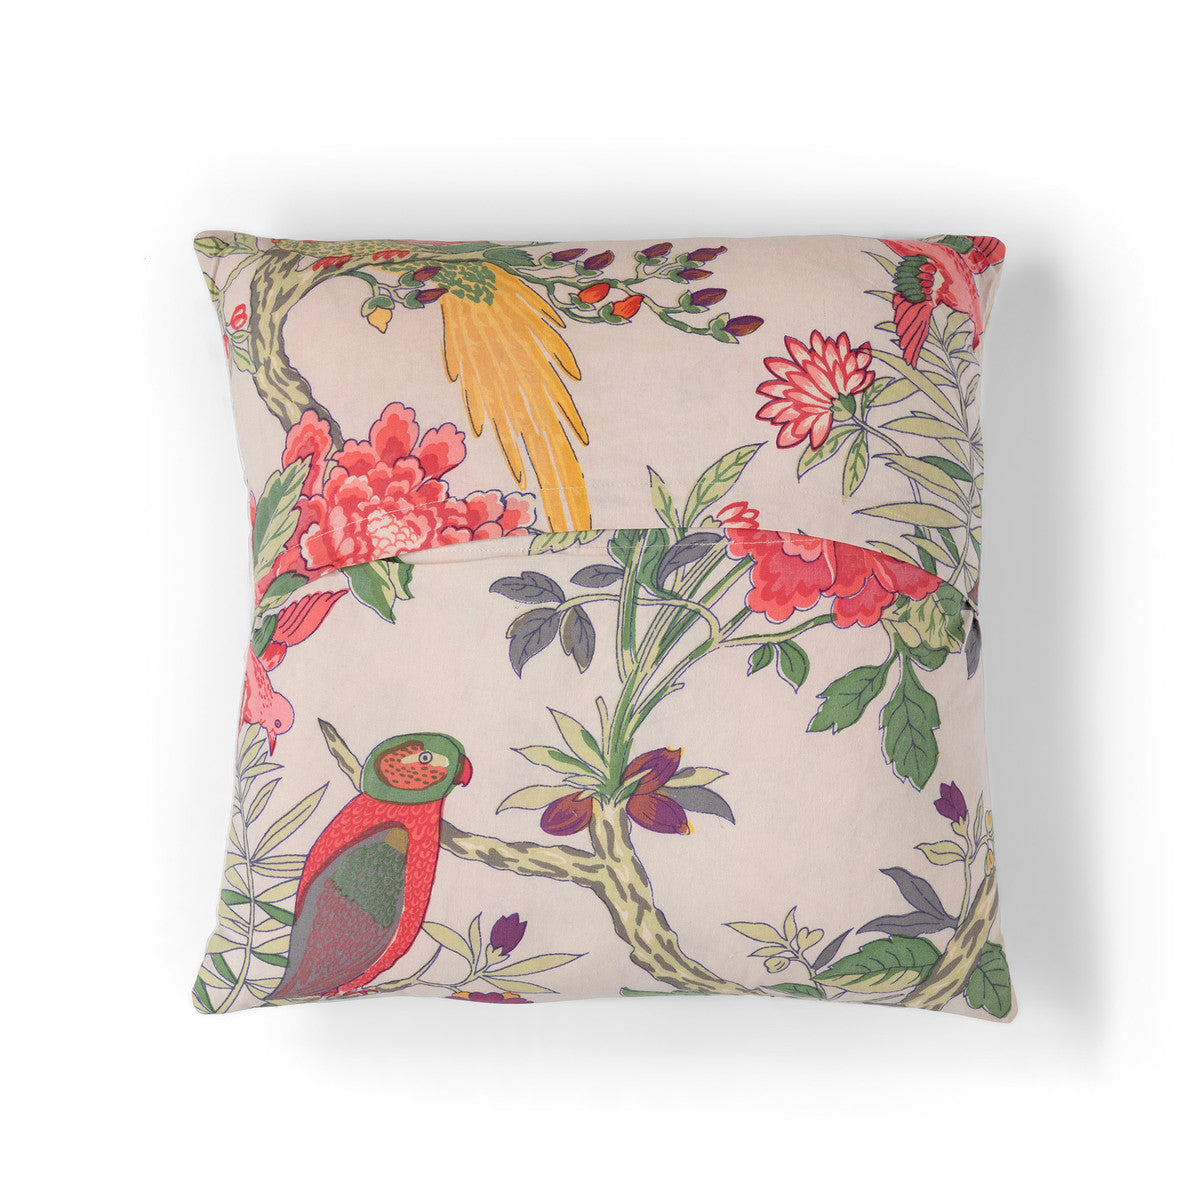 embroidered-vine-pattern-throw-pillow-back-side